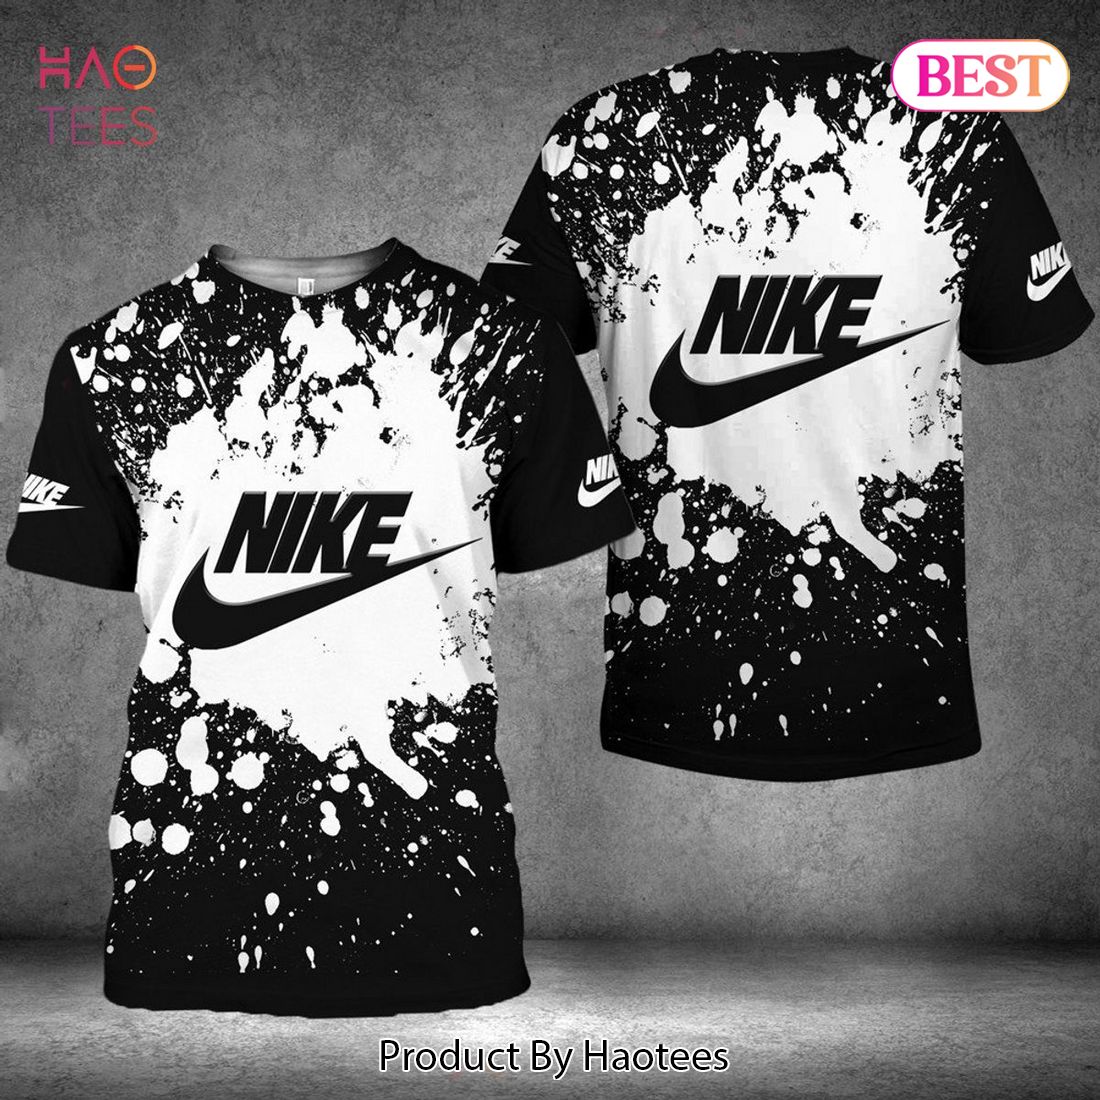 BEST Nike White Paint Flakes Luxury Brand 3D T-Shirt Limited Edition